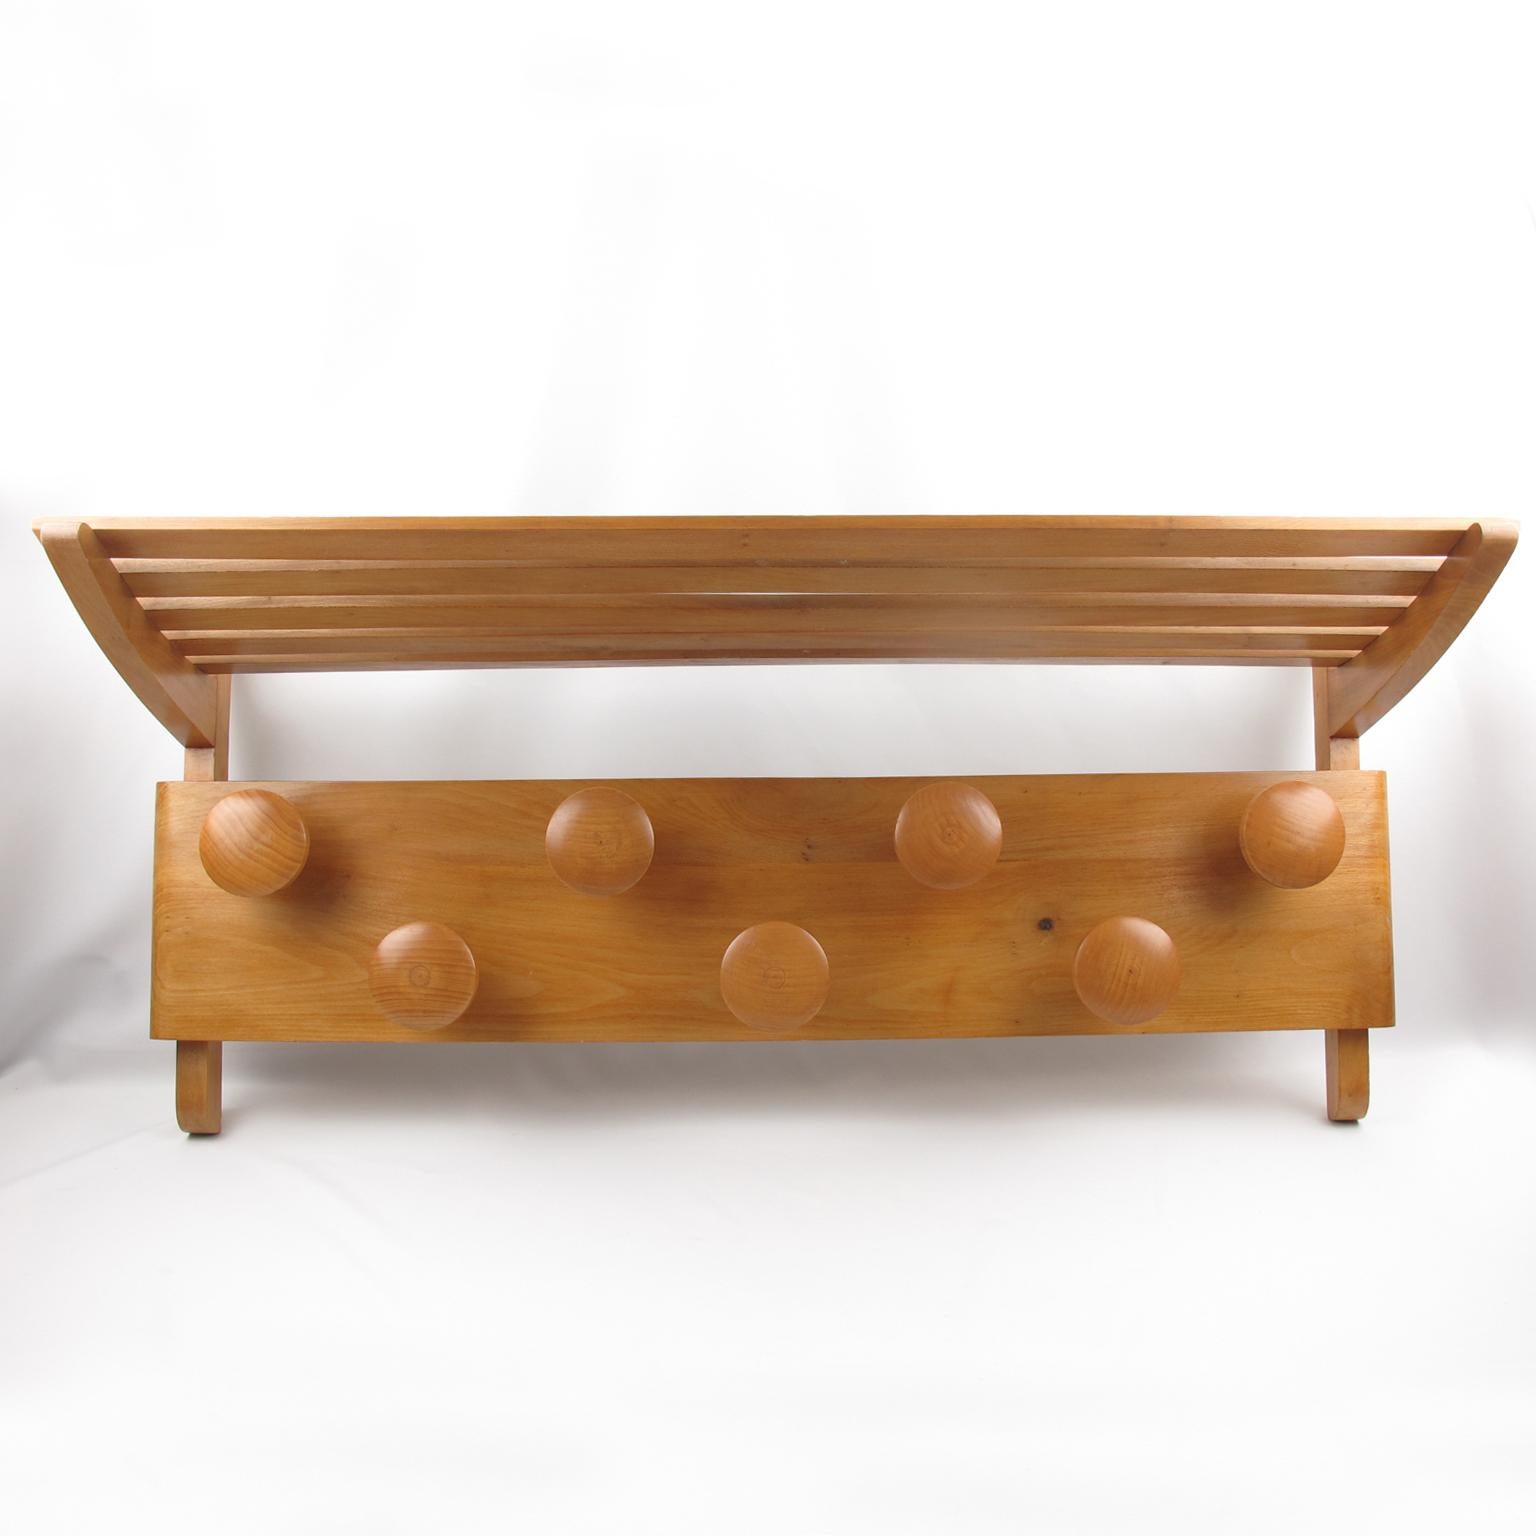 Oversized Mid-Century Modern wall-mounted wood coat rack with hat storage. Lovely varnish maple wood with Scandinavian / Danish design style. Seven round coat hooks and extra-large storage tray. No visible maker's mark.
Measurements: 36.44 in. wide